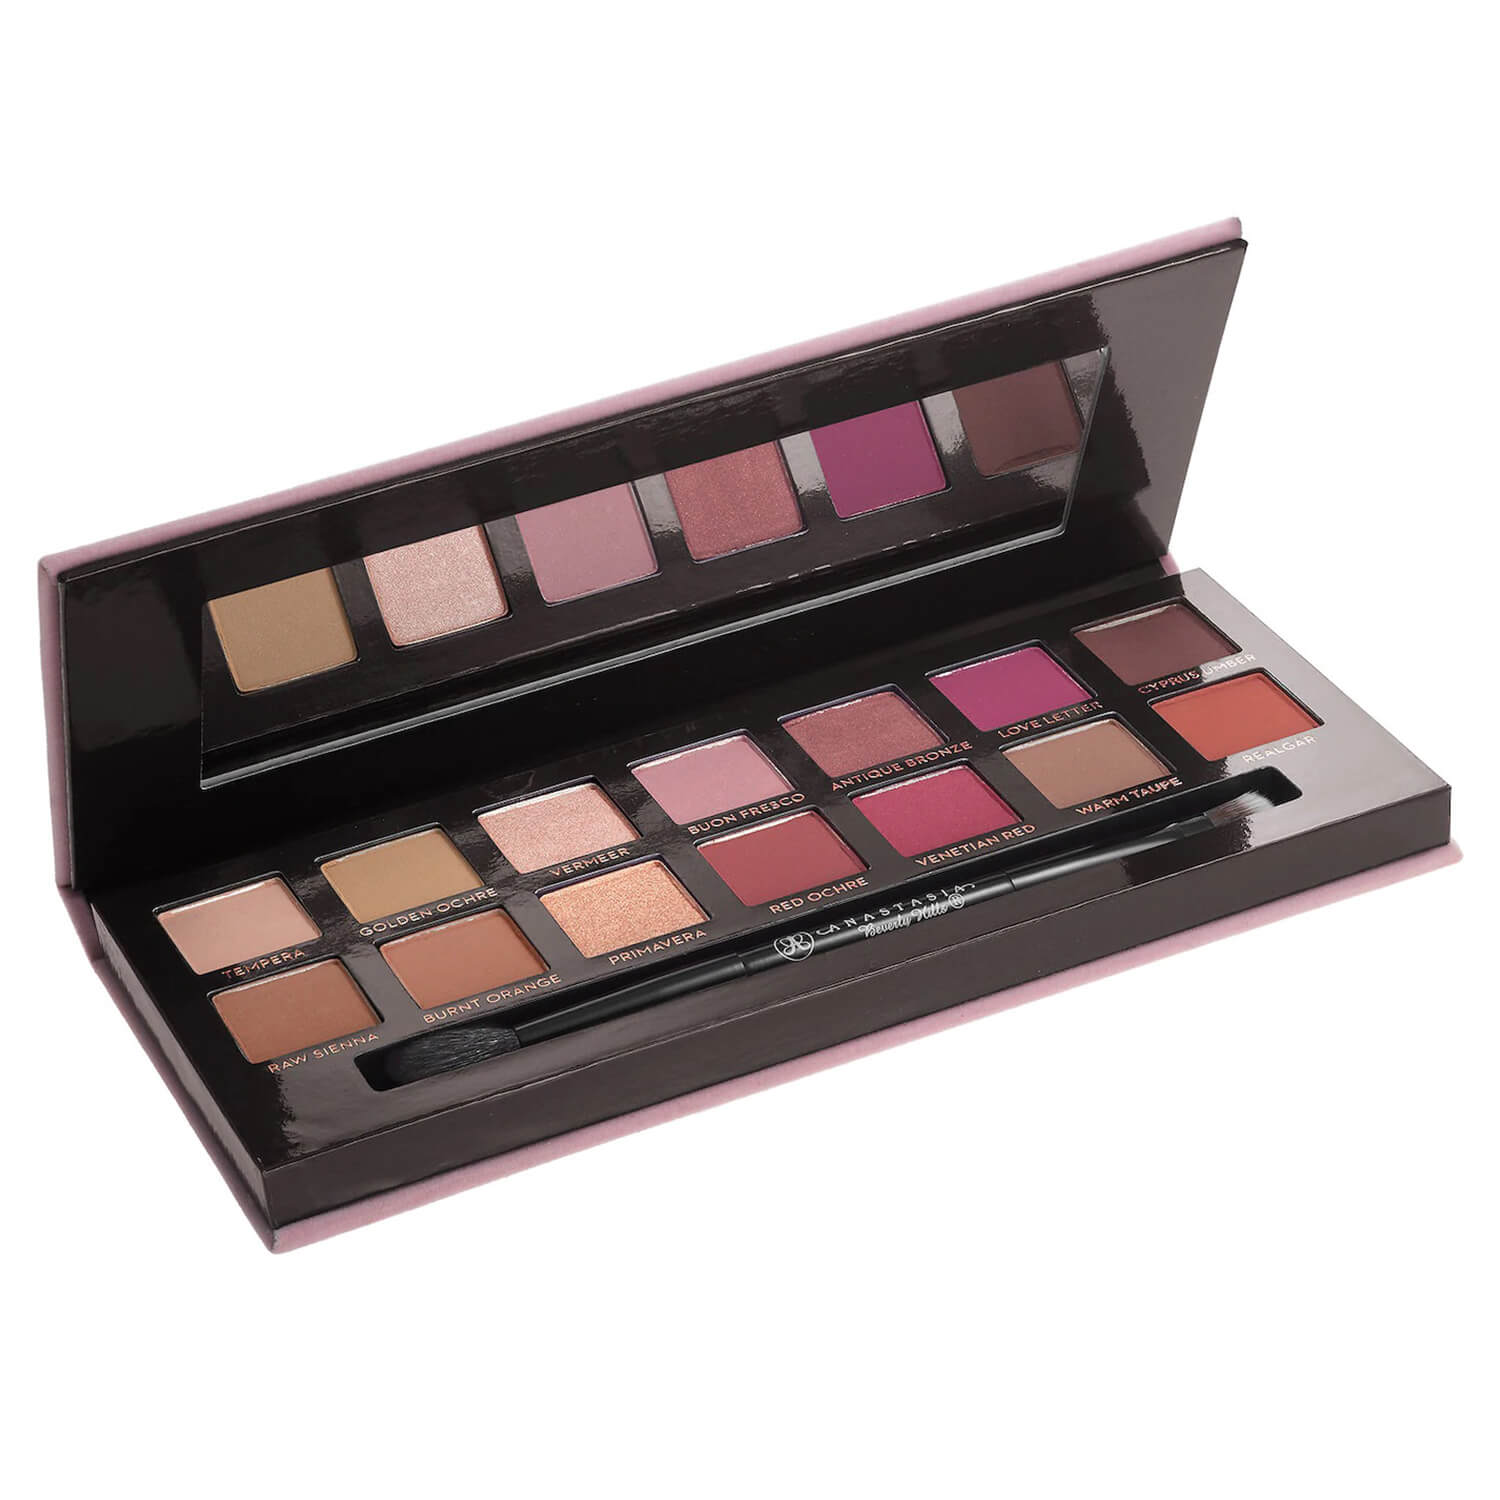 Anastasia Modern Renaissance Eye Shadow Palette available on Cash on Delivery in Karachi, Lahore, Islamabad, pakistan